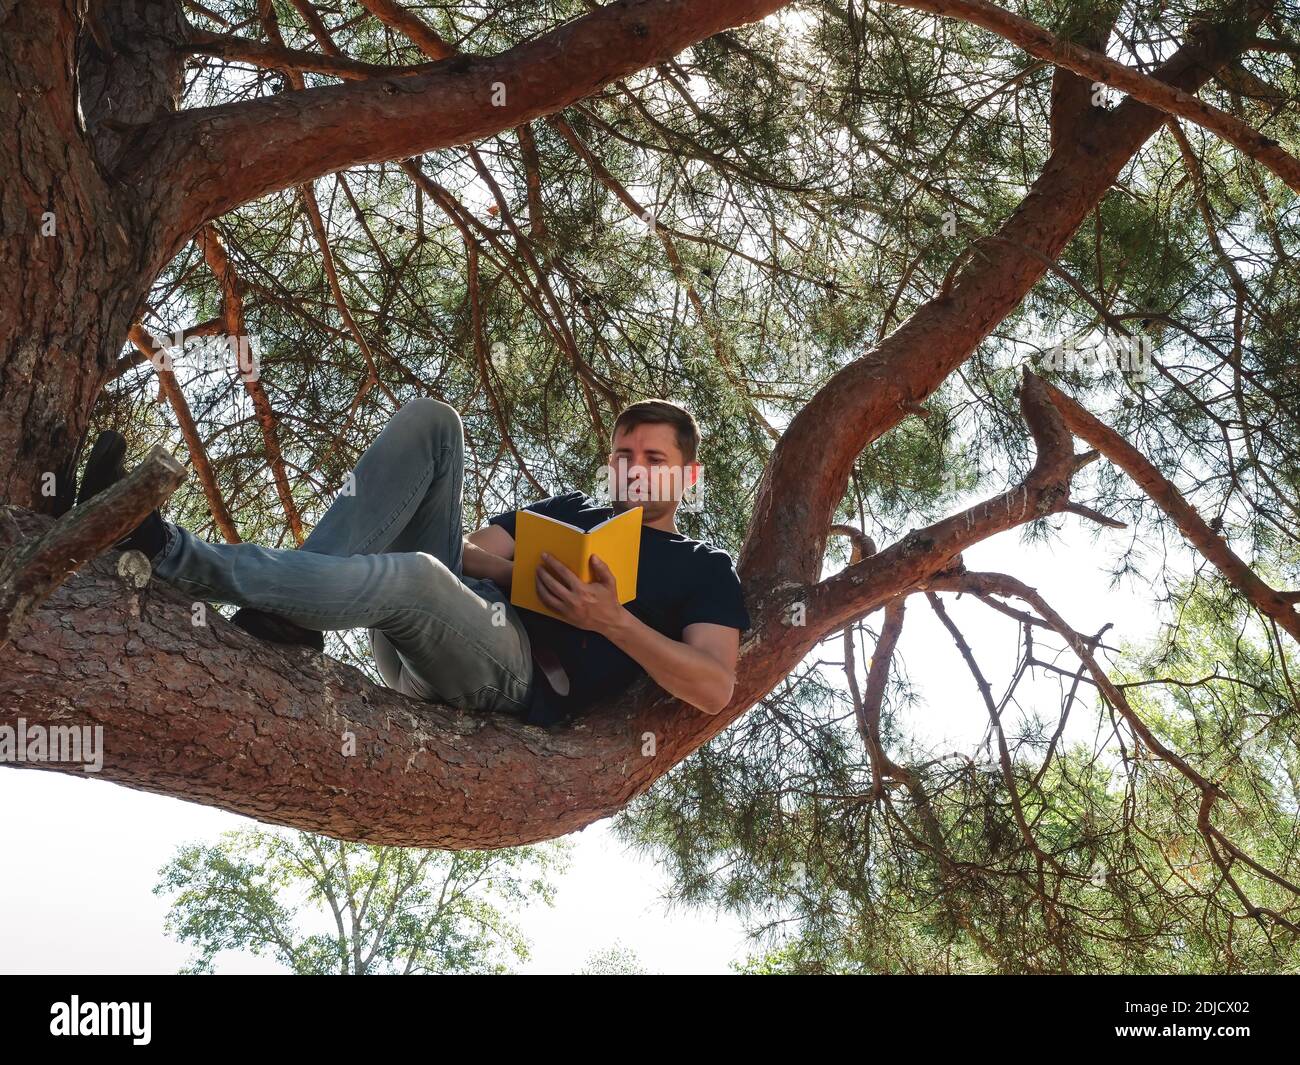 Summer outdoor recreation. The guy is reading a book while sitting on a tree branch. Stock Photo